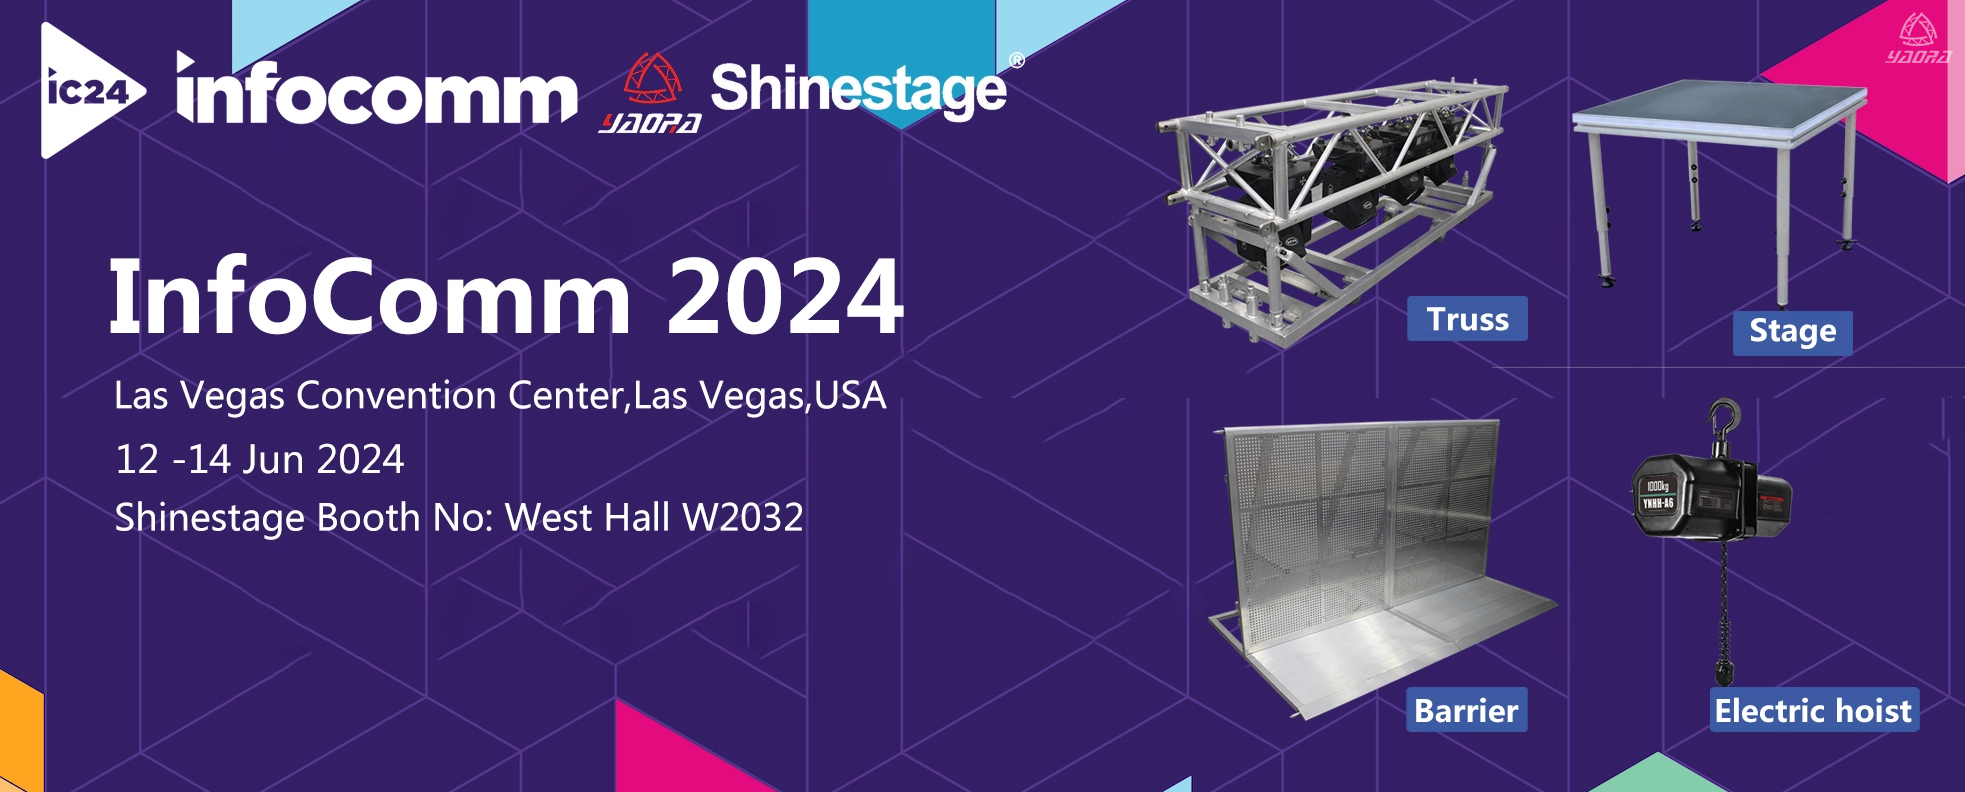 Shinestage Invites You To Meet at Infocomm 2024